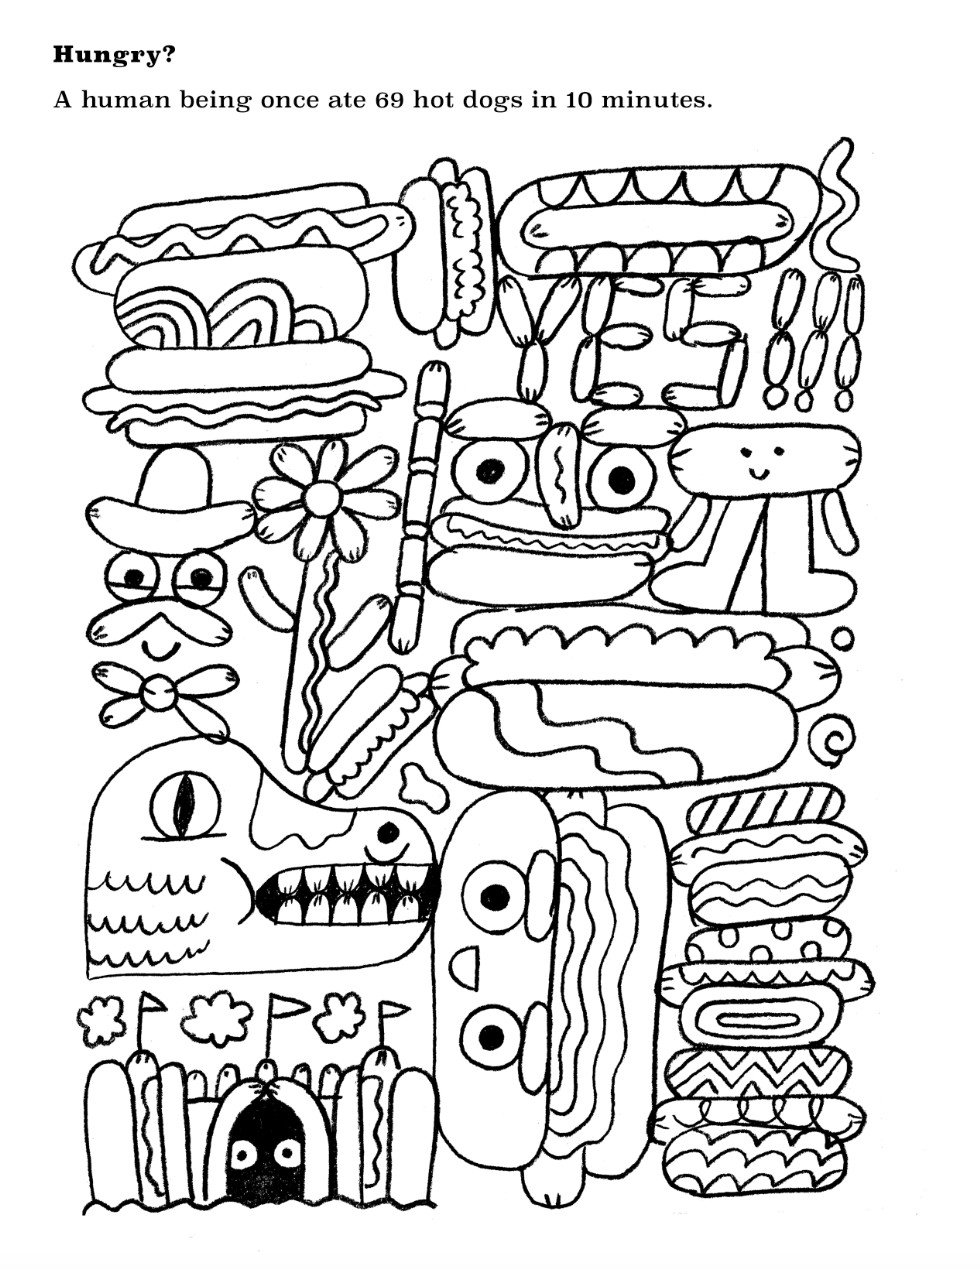 Weird Coloring Book Pages
 Limited Weird Design Coloring Pages Pattern The Sun Flower